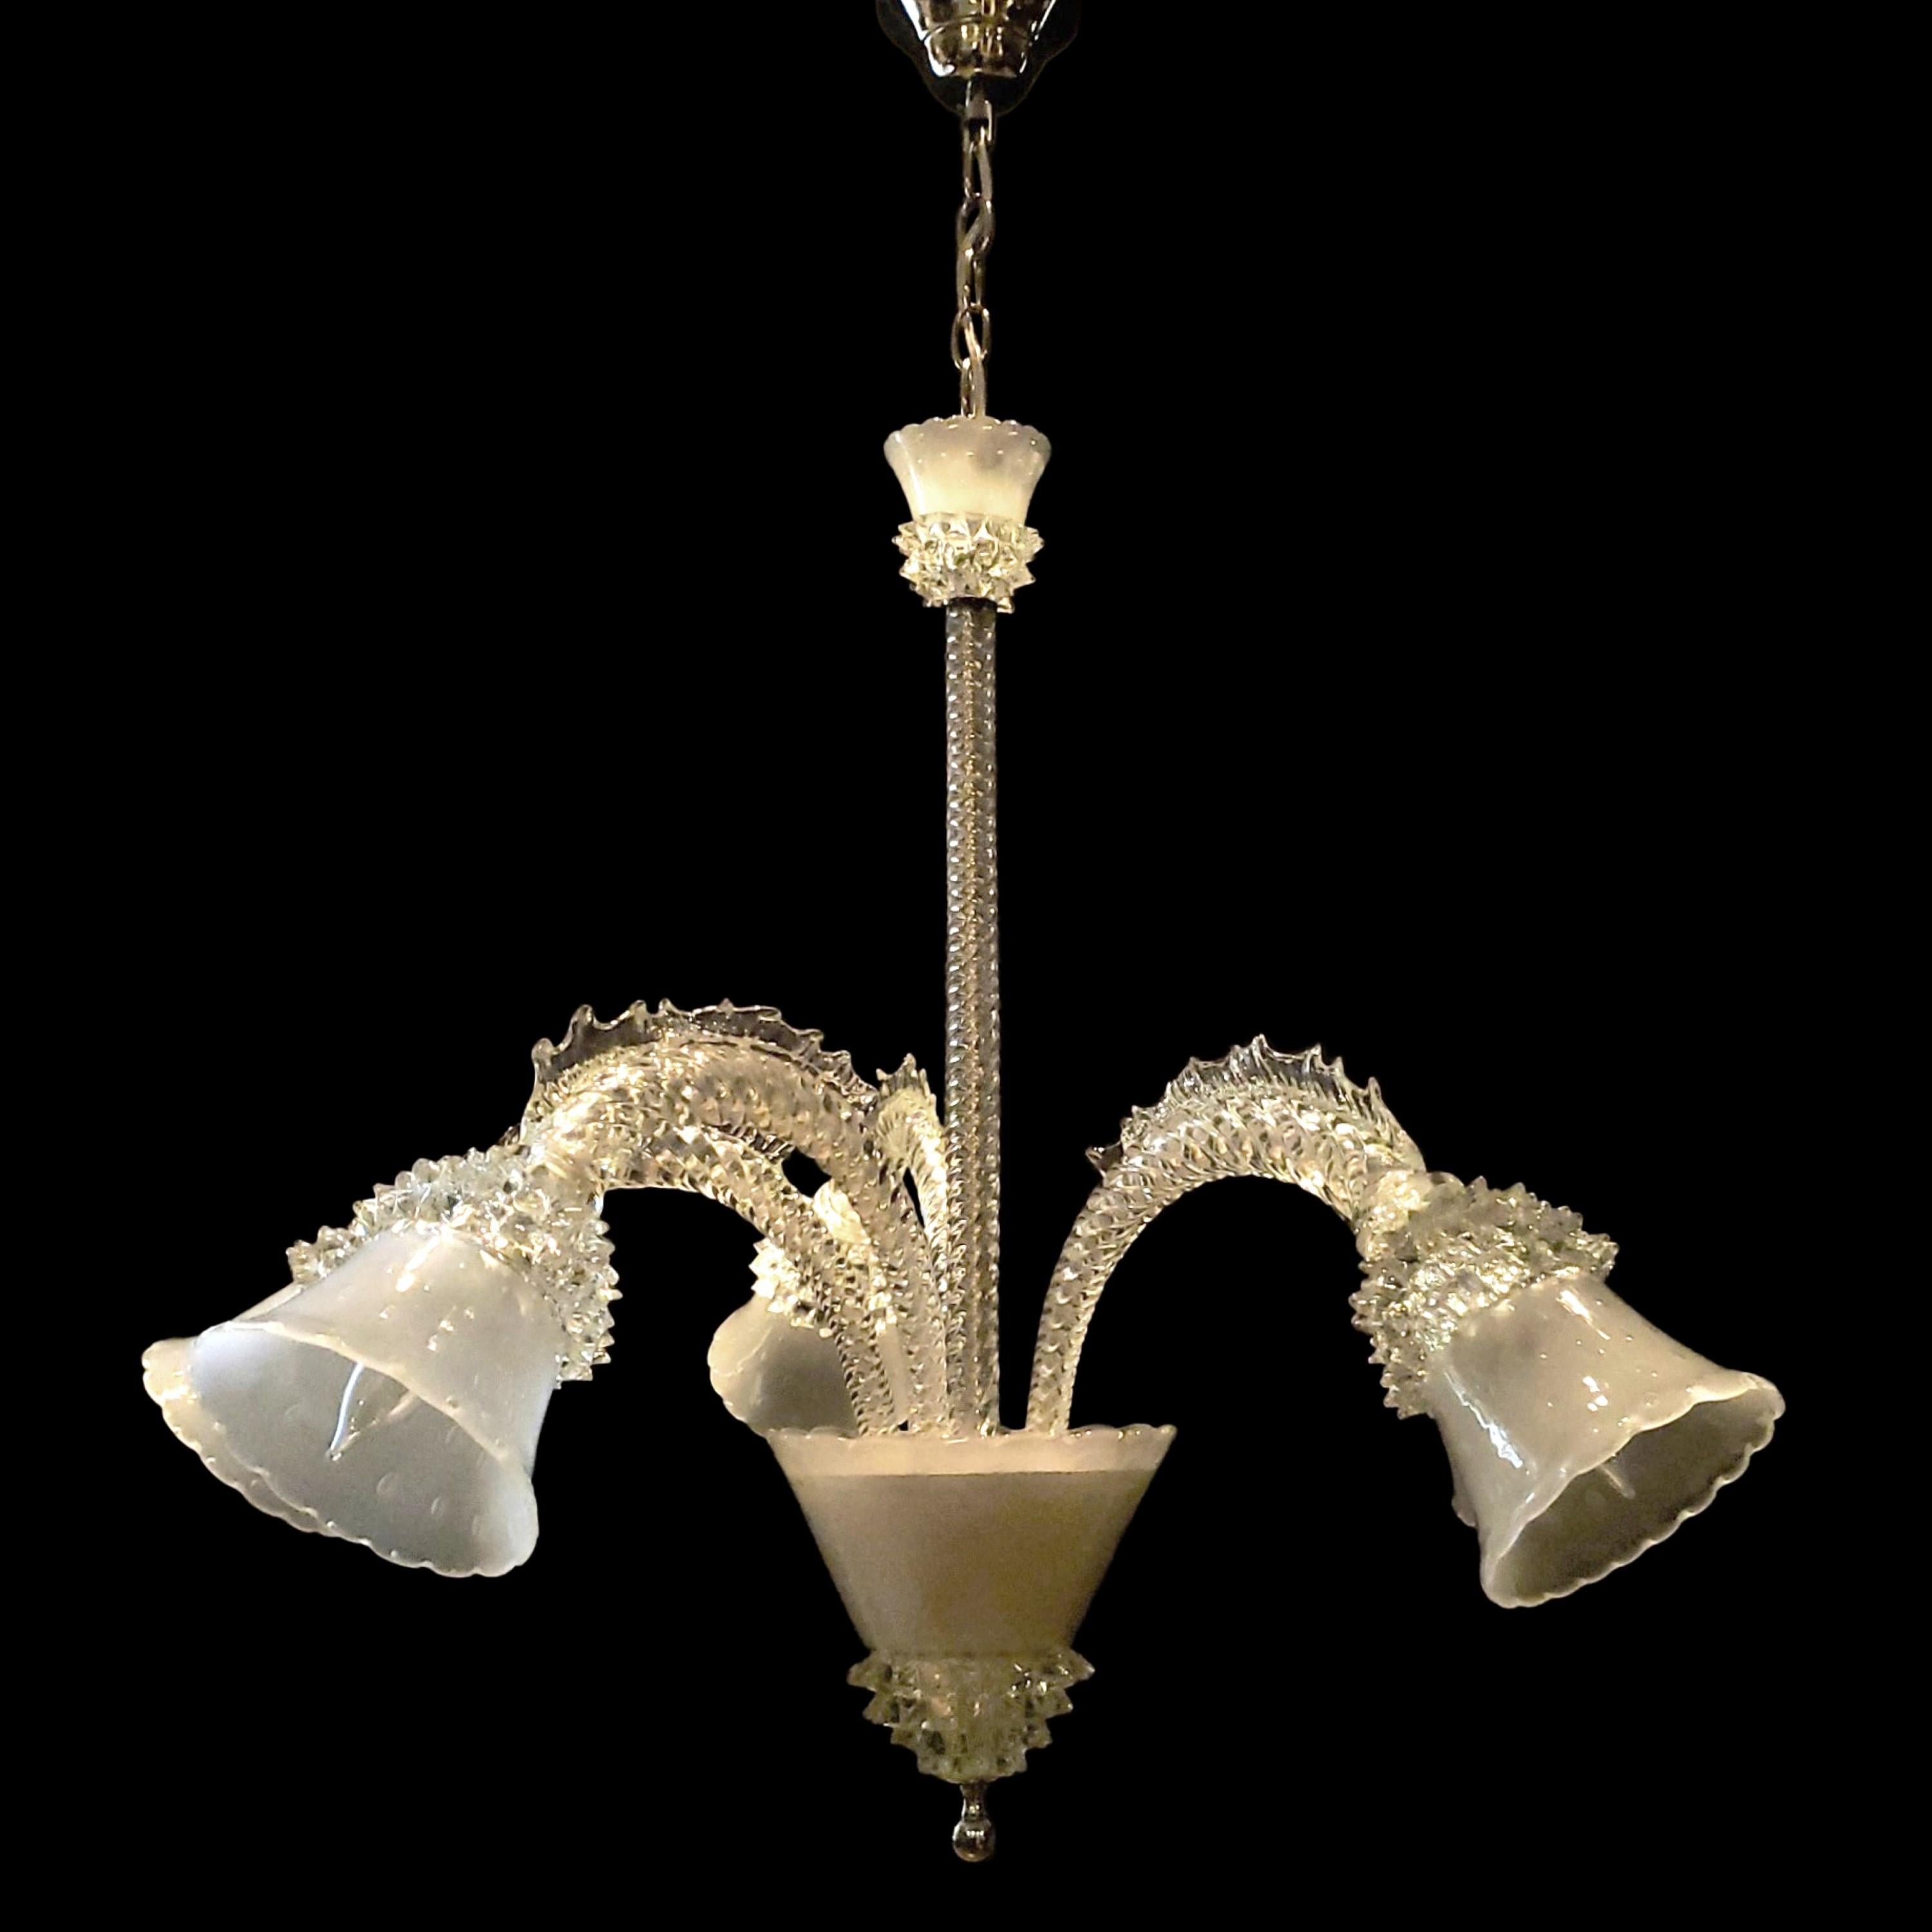 Hand made Murano controlled bubble Rostrato chandelier with four C shaped fin arms and frosted glass bowls. This comes rewired and ready to install. Ships disassembled. Cleaned and restored. Please note, this item is located in our Scranton, PA